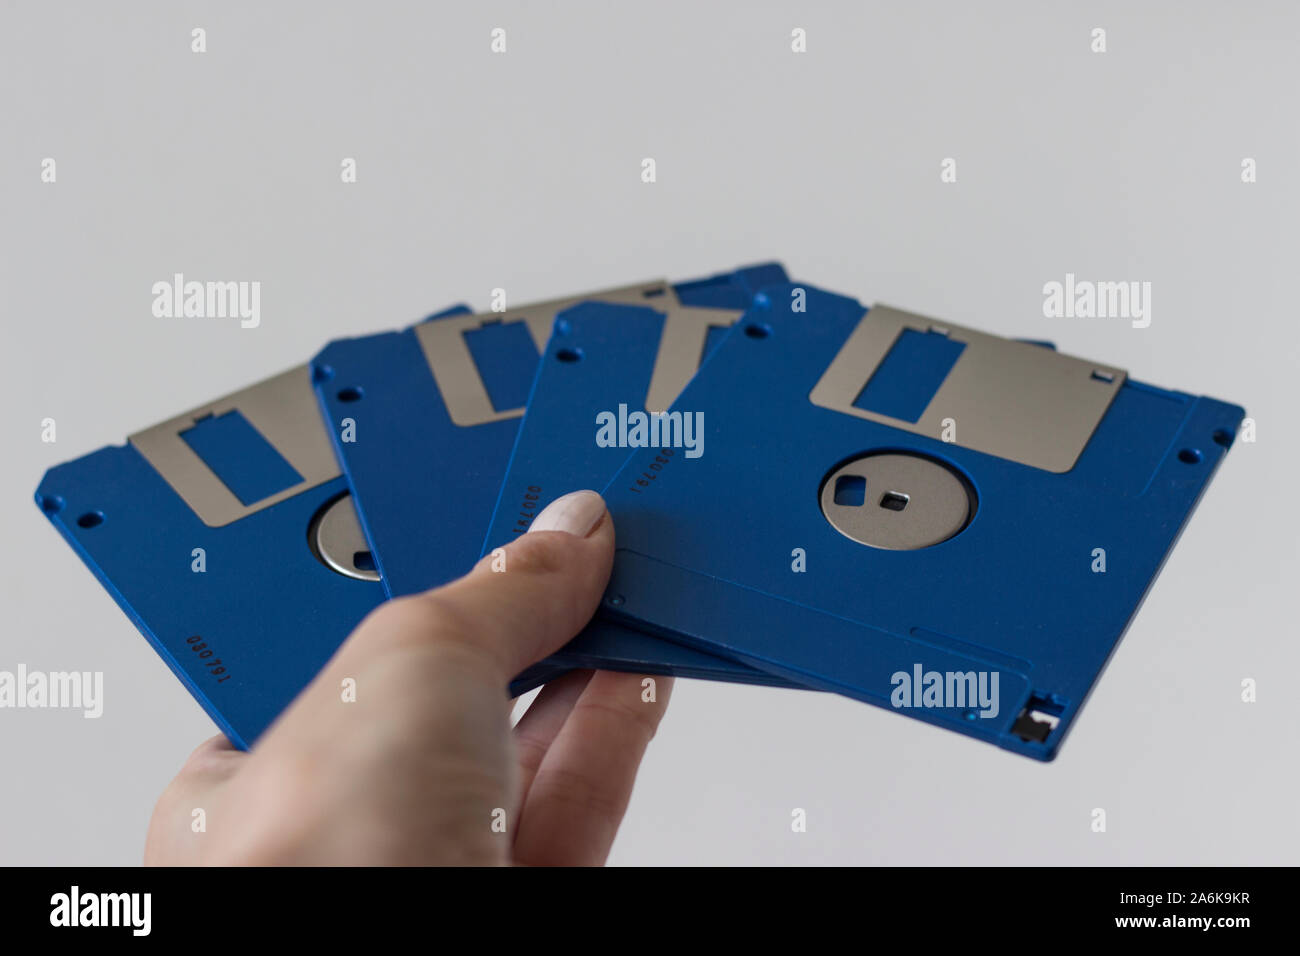 Holding Blue Floppy A disks isolated on white background.Disk storage Stock Photo